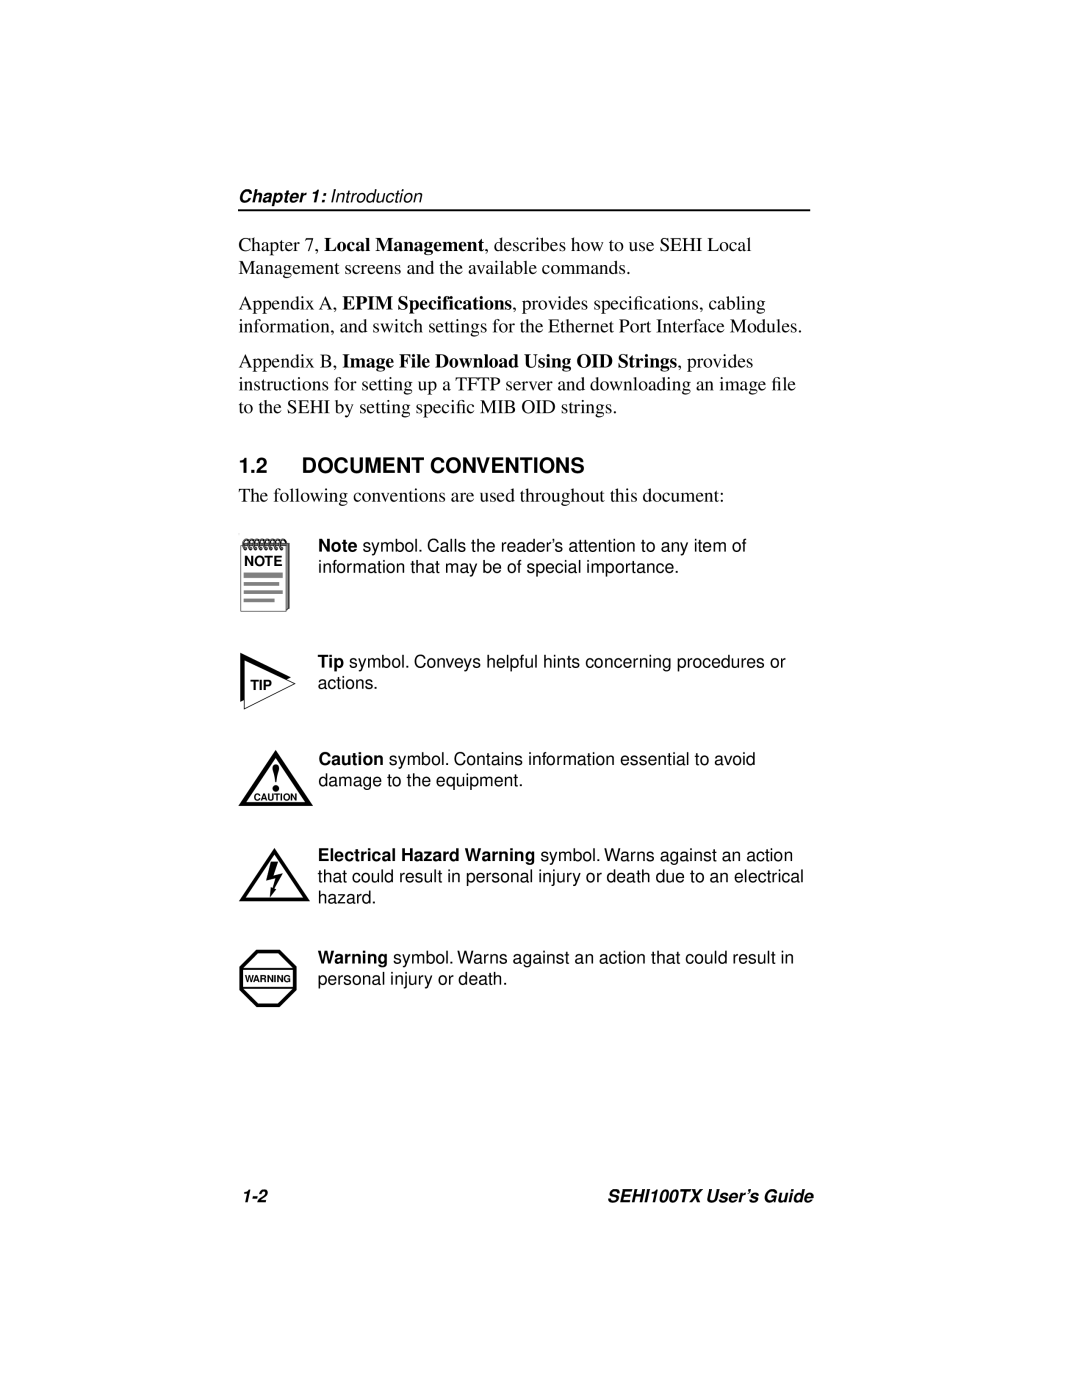 Cabletron Systems SEHI100TX-22 manual Document Conventions 